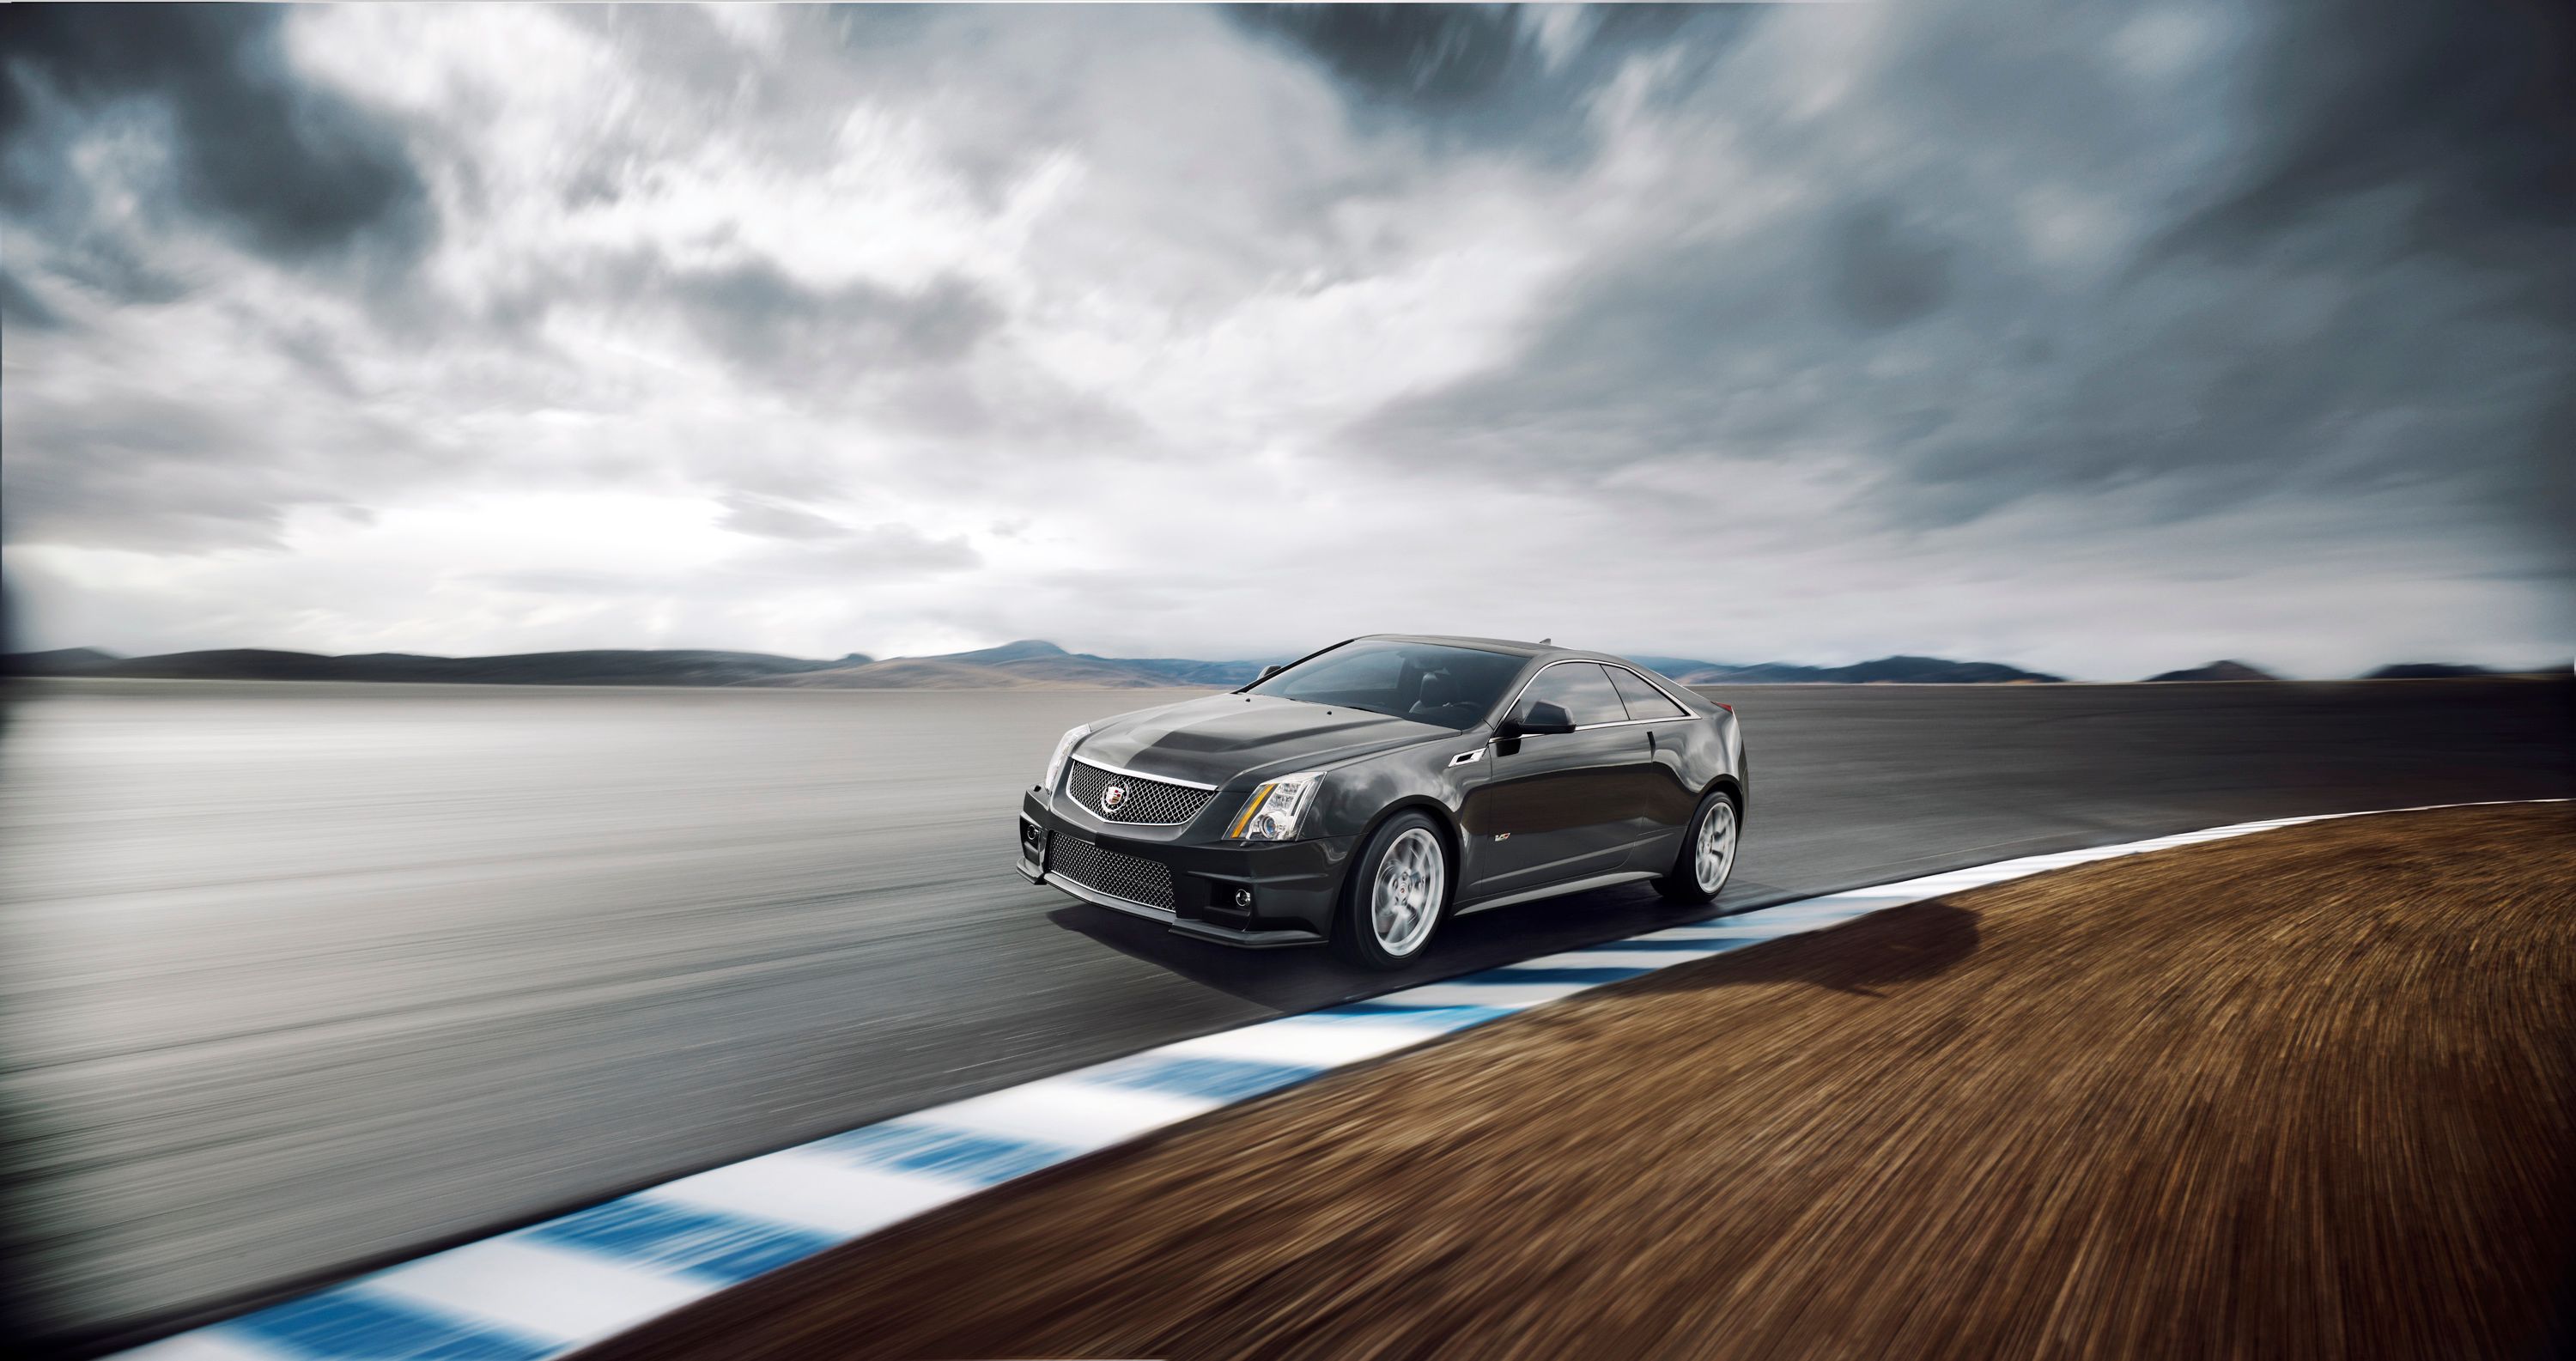 Cadillac's 2014 CTS-V Coupe on track